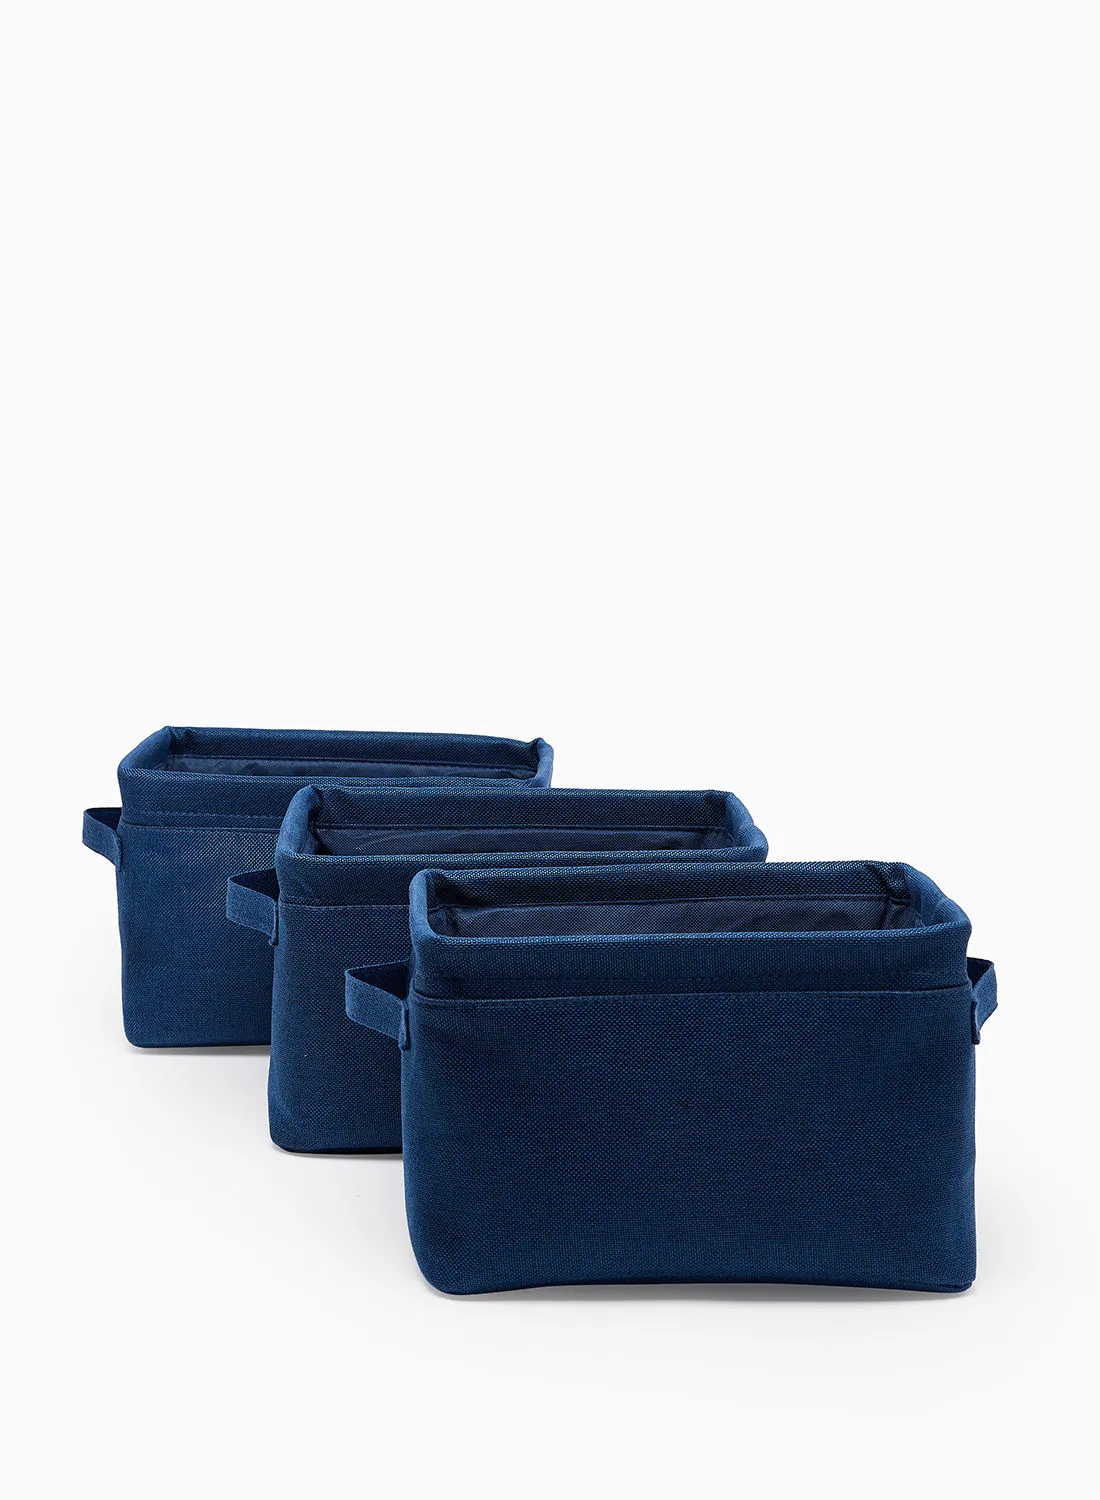 Amal 3 Pack Linen Storage Organiser With Side Handles Easy To Collapse From The Top, Handy For Closet And Dresser Organisation Blue 30X20X20cm